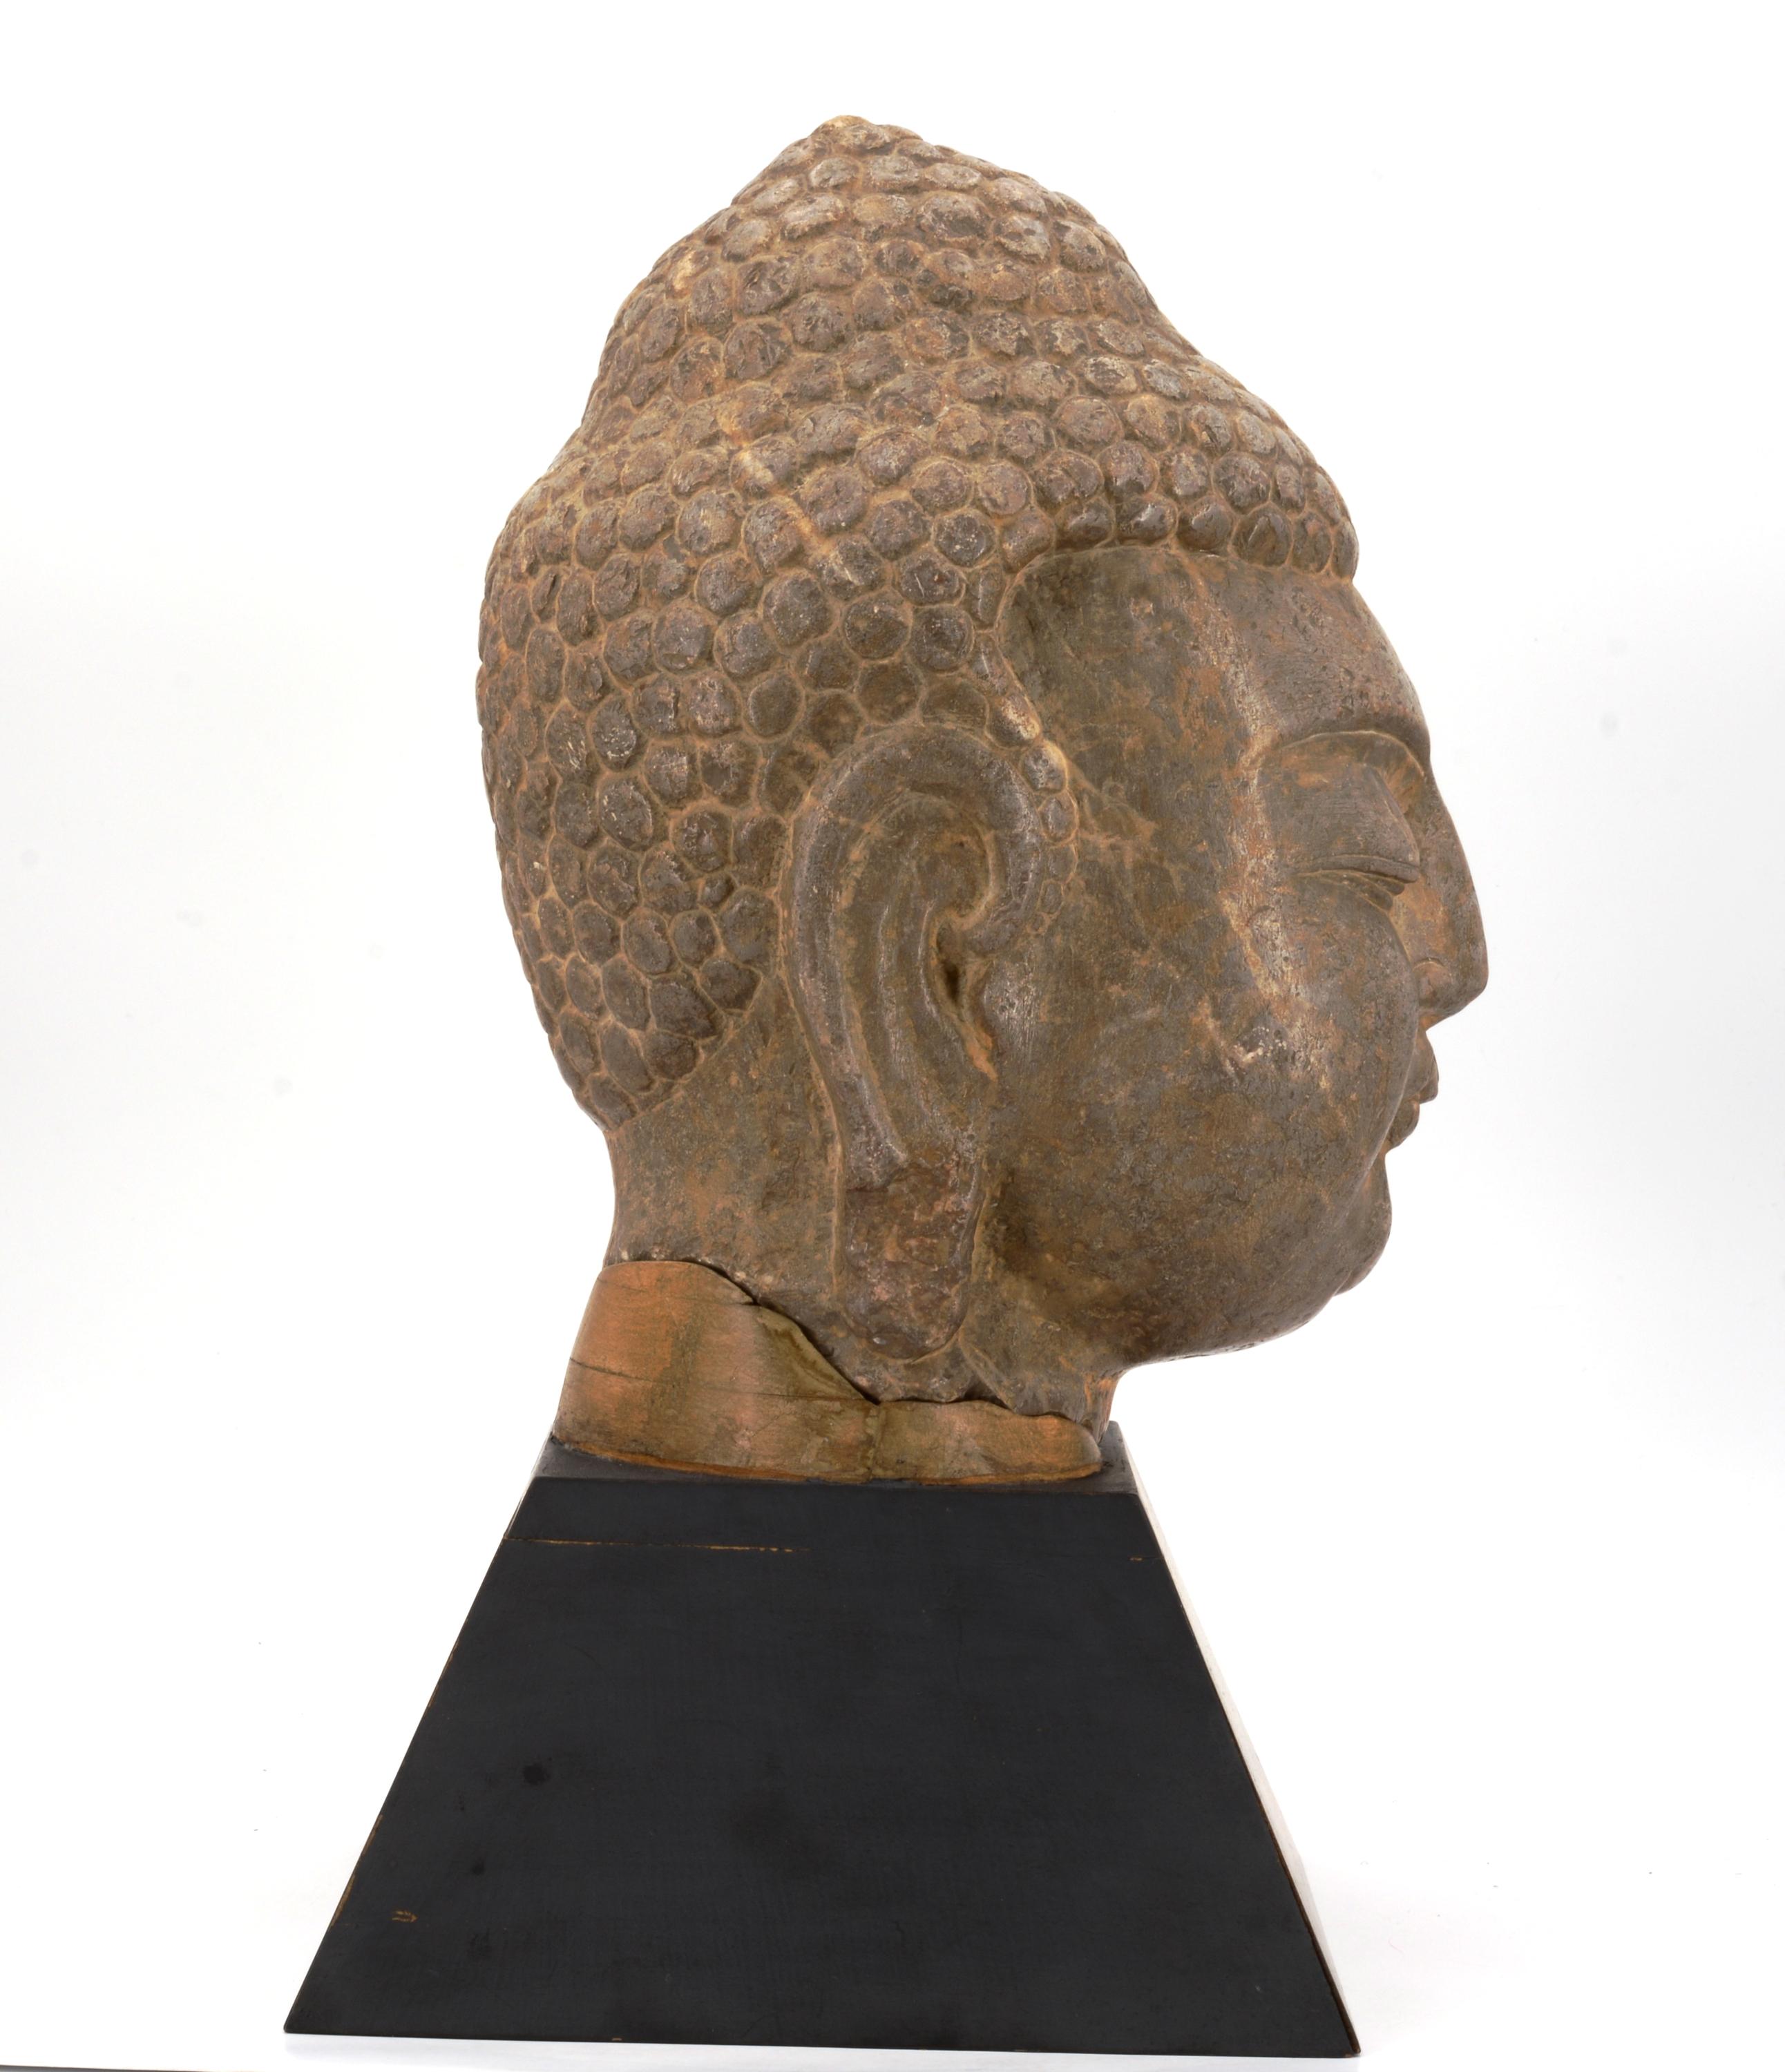 IMPORTANT LARGE HEAD OF A BUDDHA. Origin: China. Dynasty: Northern Qi/early Sui dynasty. Date: 6th - Image 4 of 6